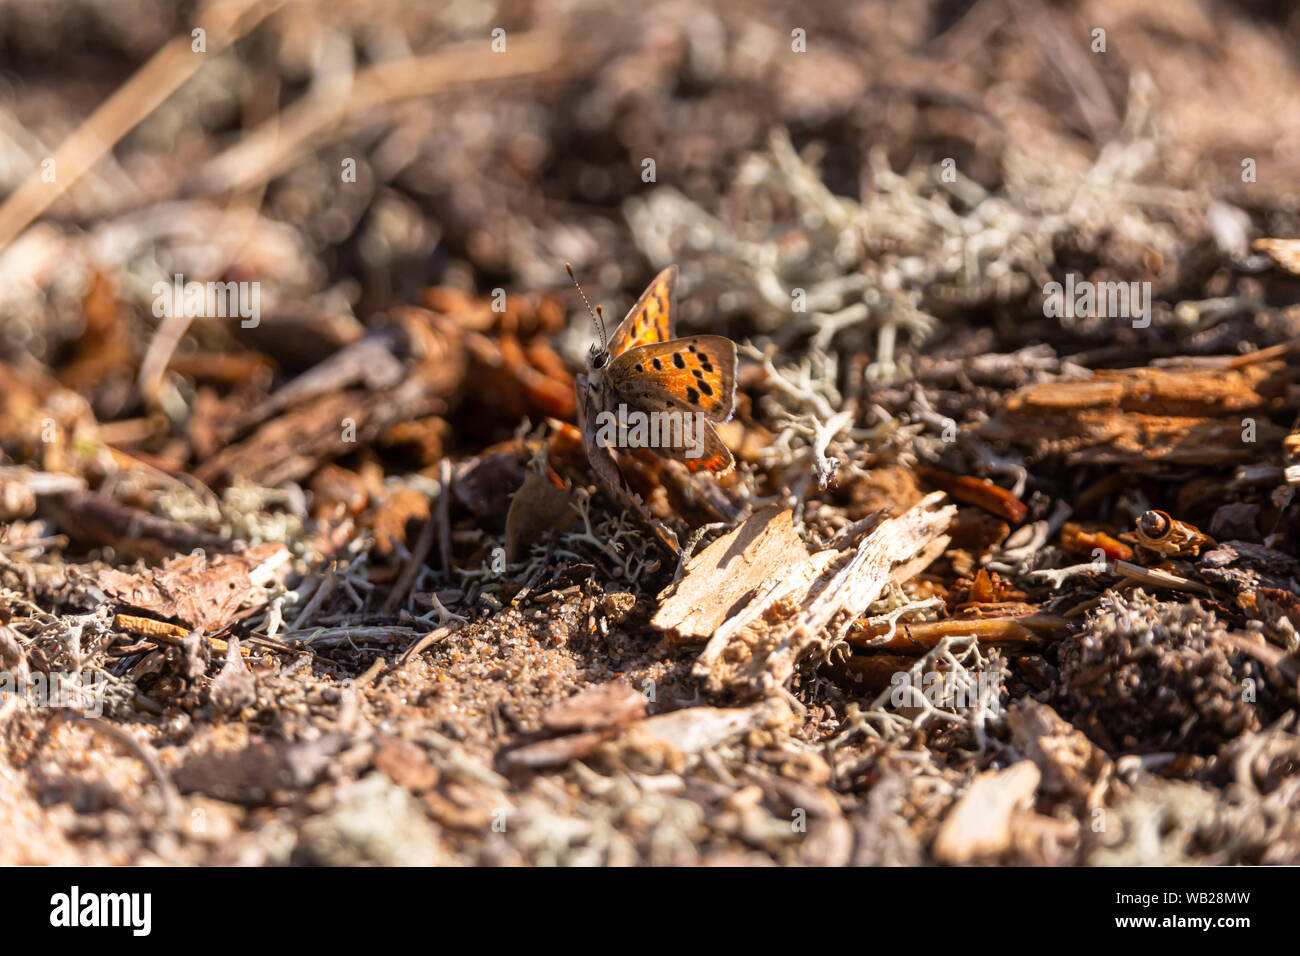 Colorful little butterfly looking for moisture in the sand,North Ostrobothnia, Hailuoto island, Finland Stock Photo